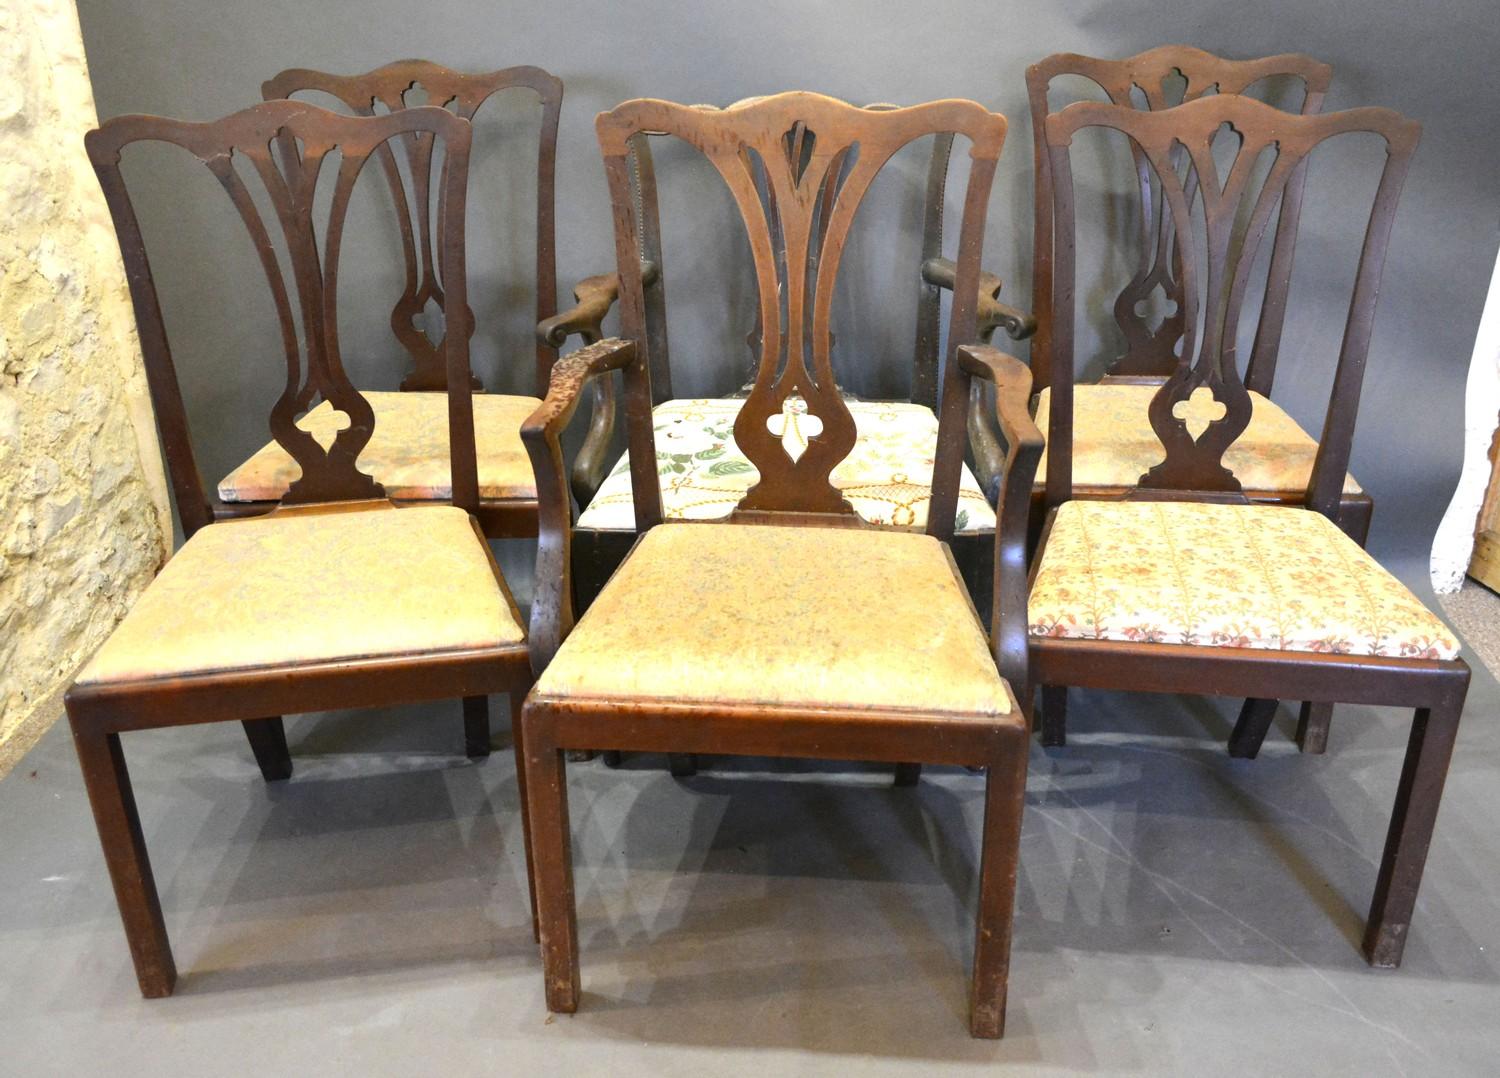 A Set of Five 19th Century Chippendale Style Mahogany Dining Room Chairs together with a similar